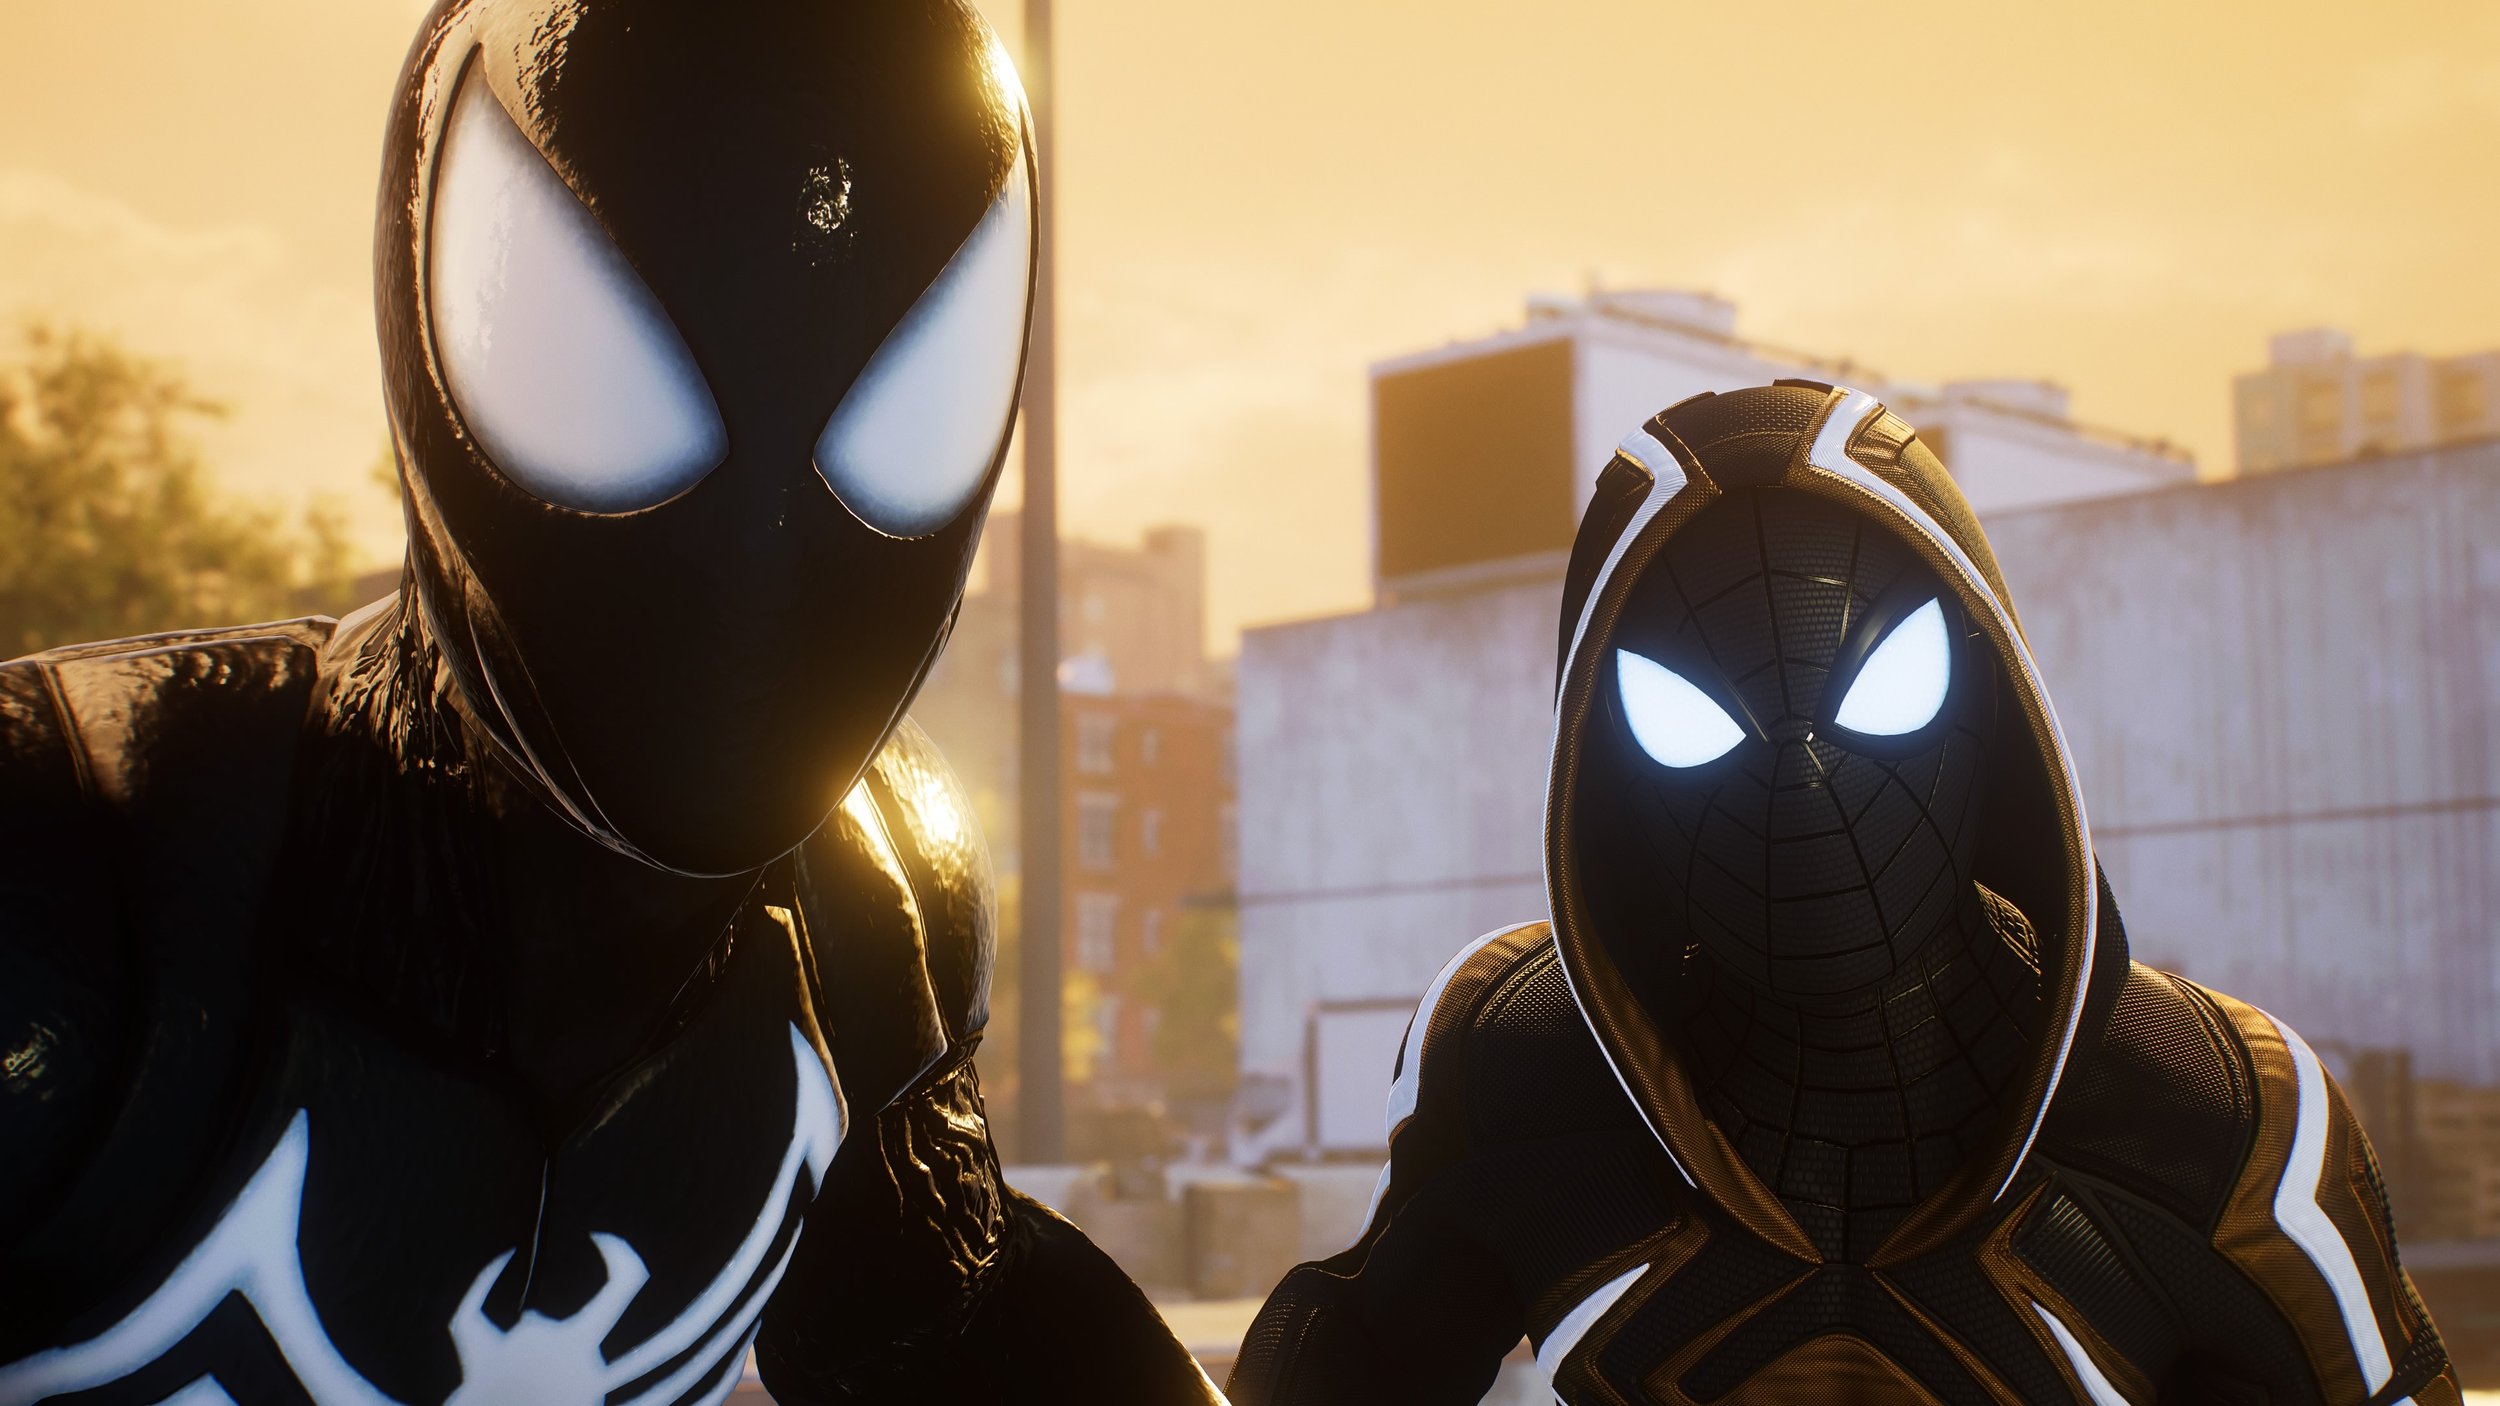 Marvel's Spider-Man 2 Review - Two Spideys Are Better Than One — Too Much  Gaming